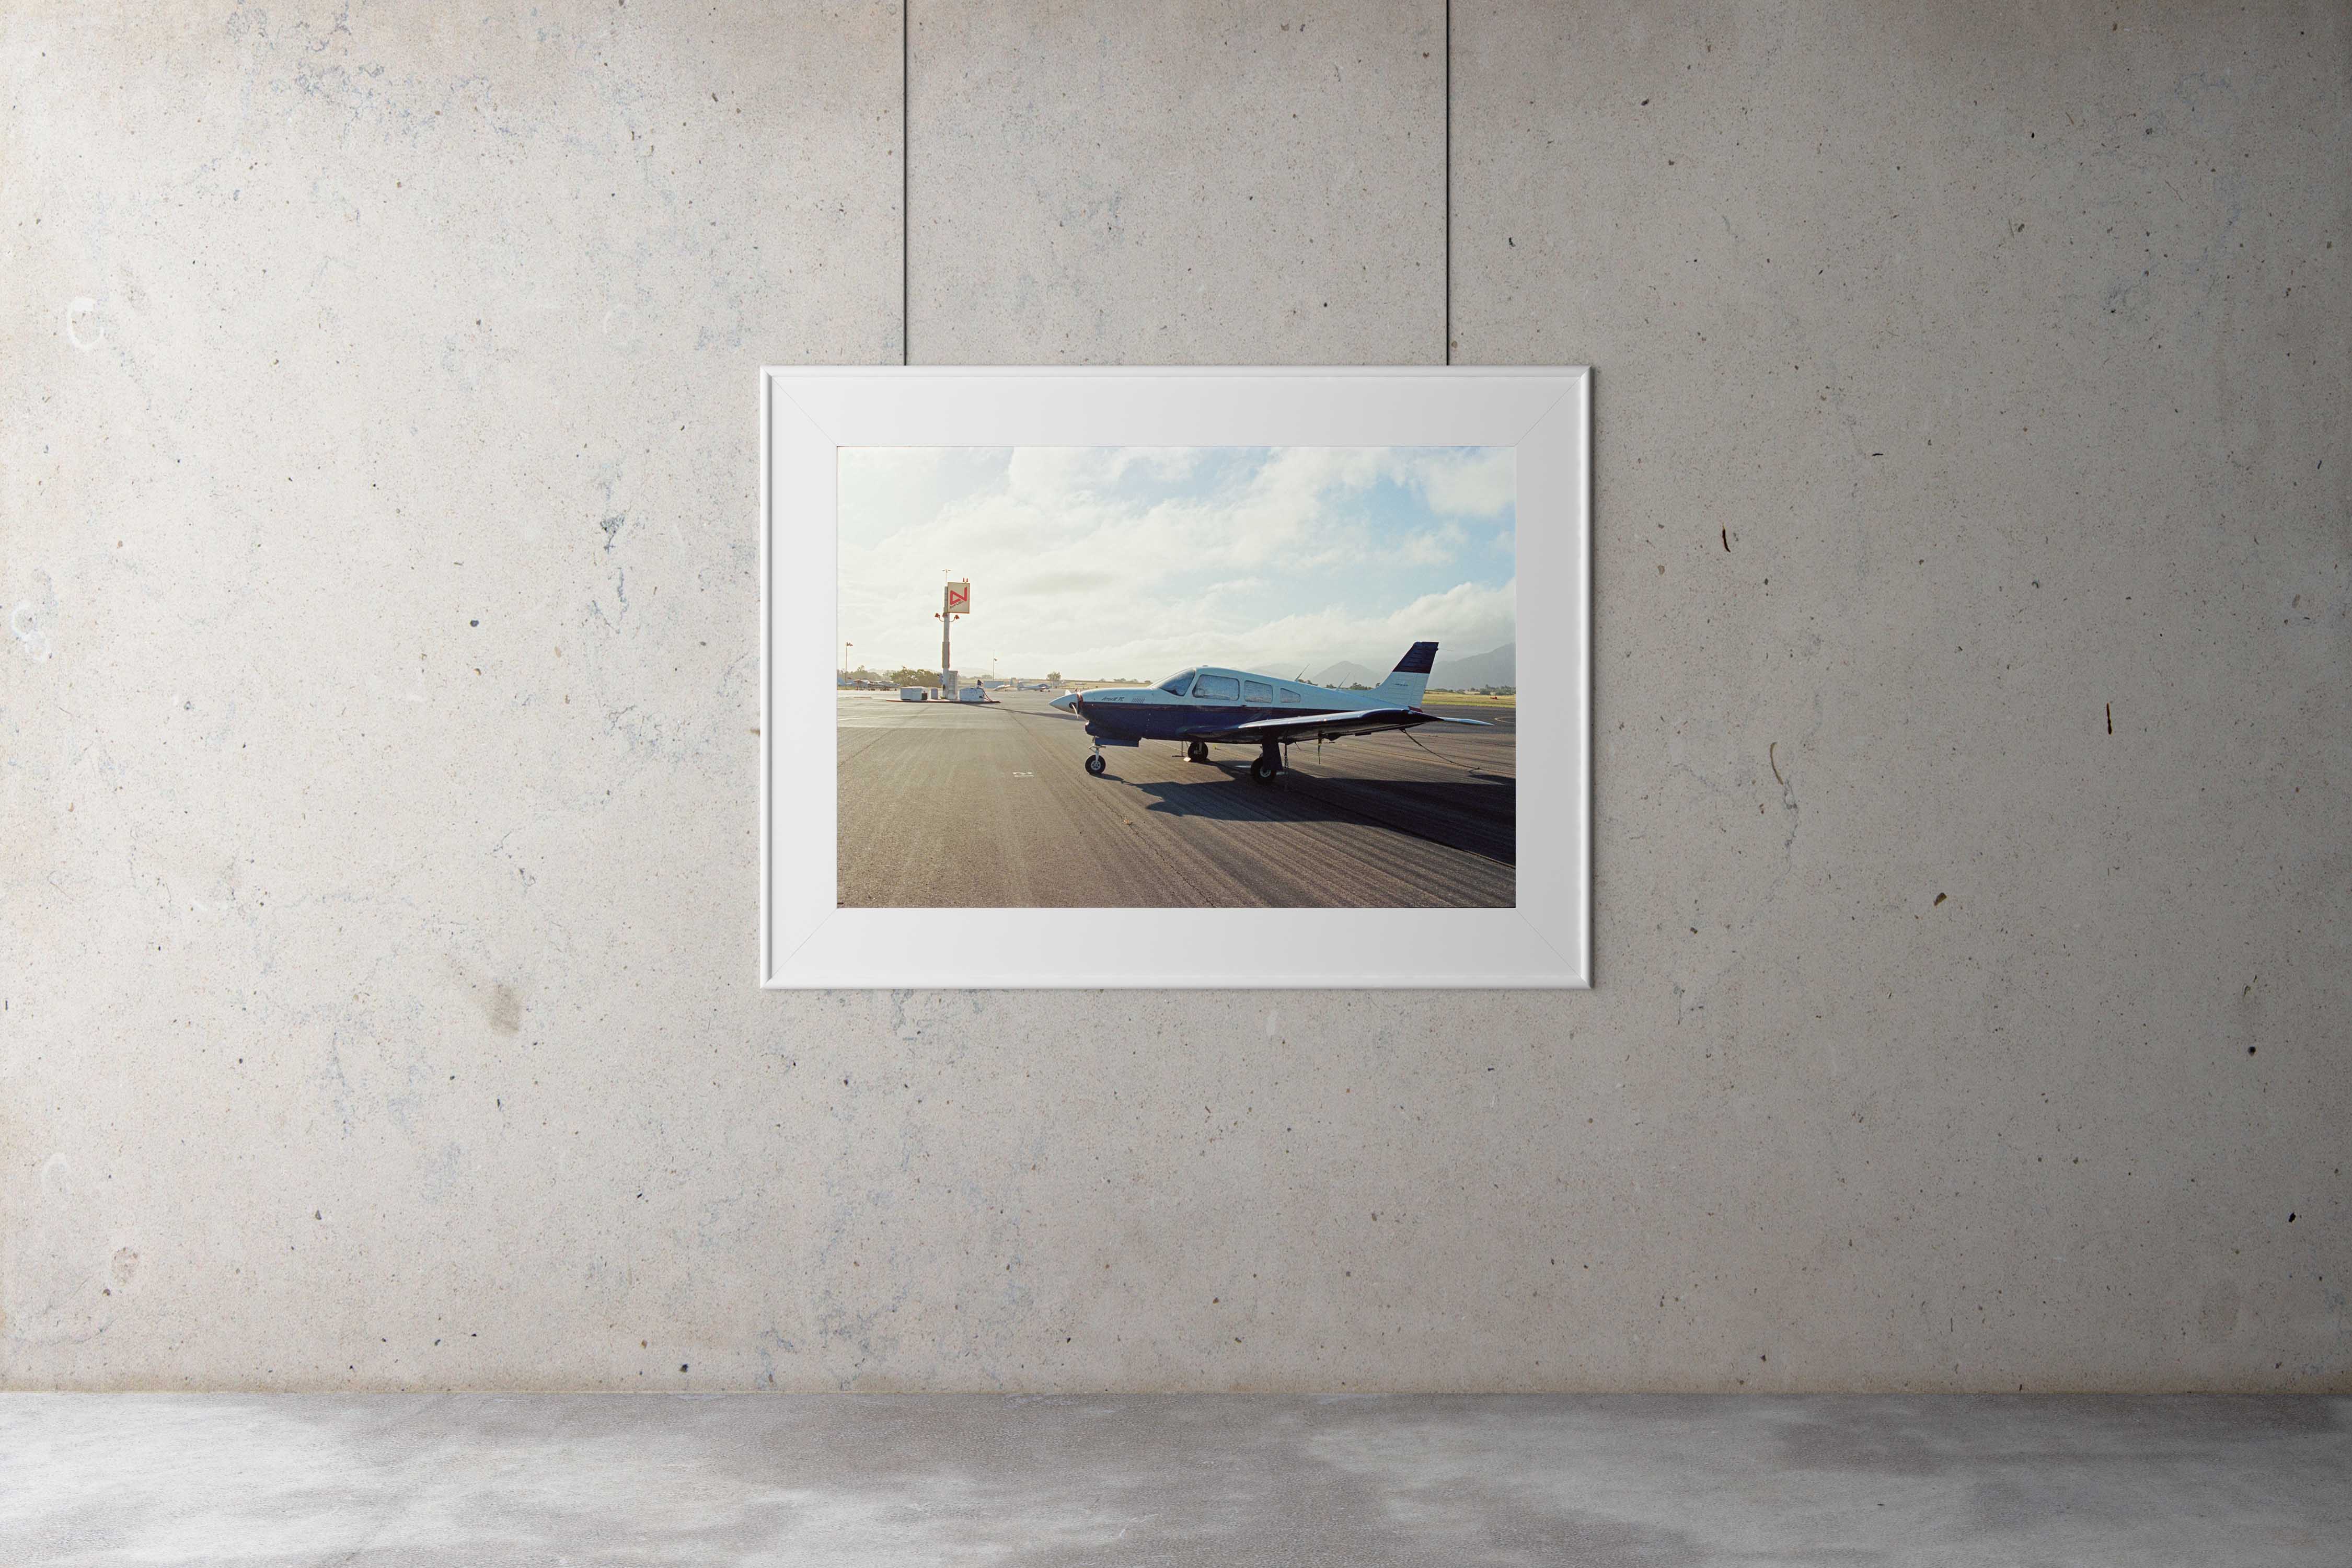 A photographic gallery framed picture of a 1970's single engine plane on a lonely tarmac in California